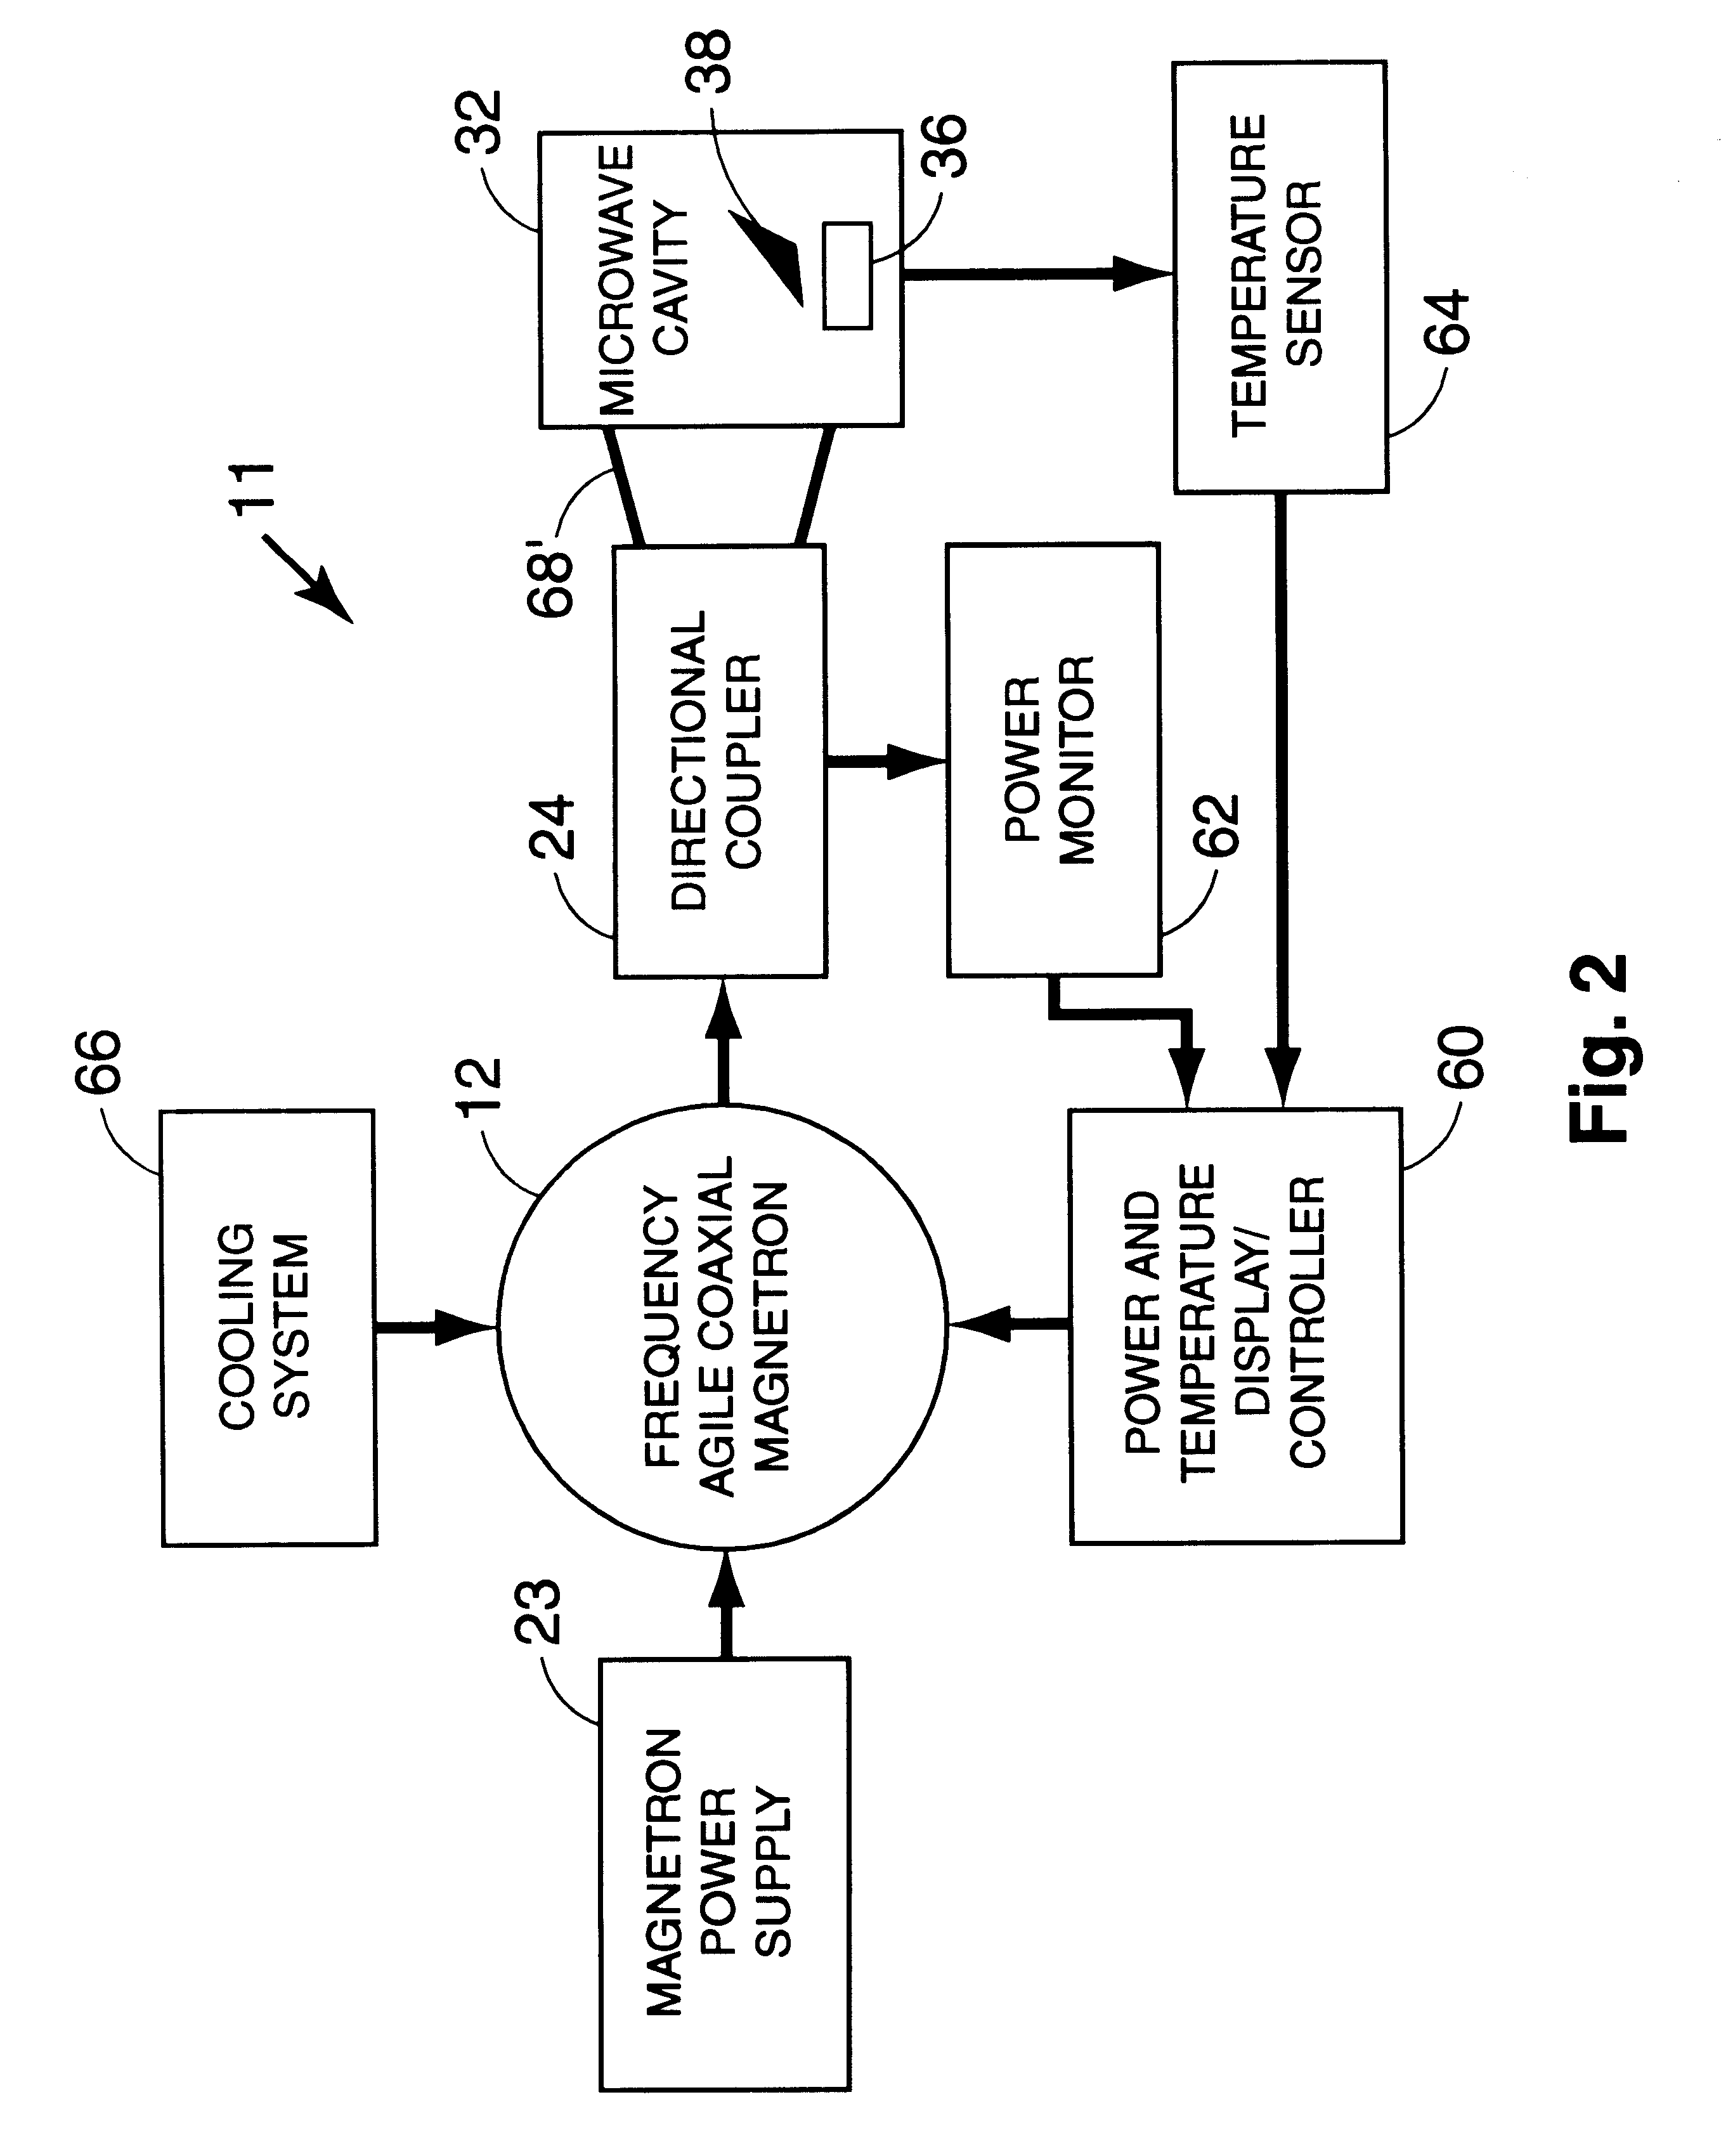 Apparatus and method for microwave processing of materials using field-perturbing tool